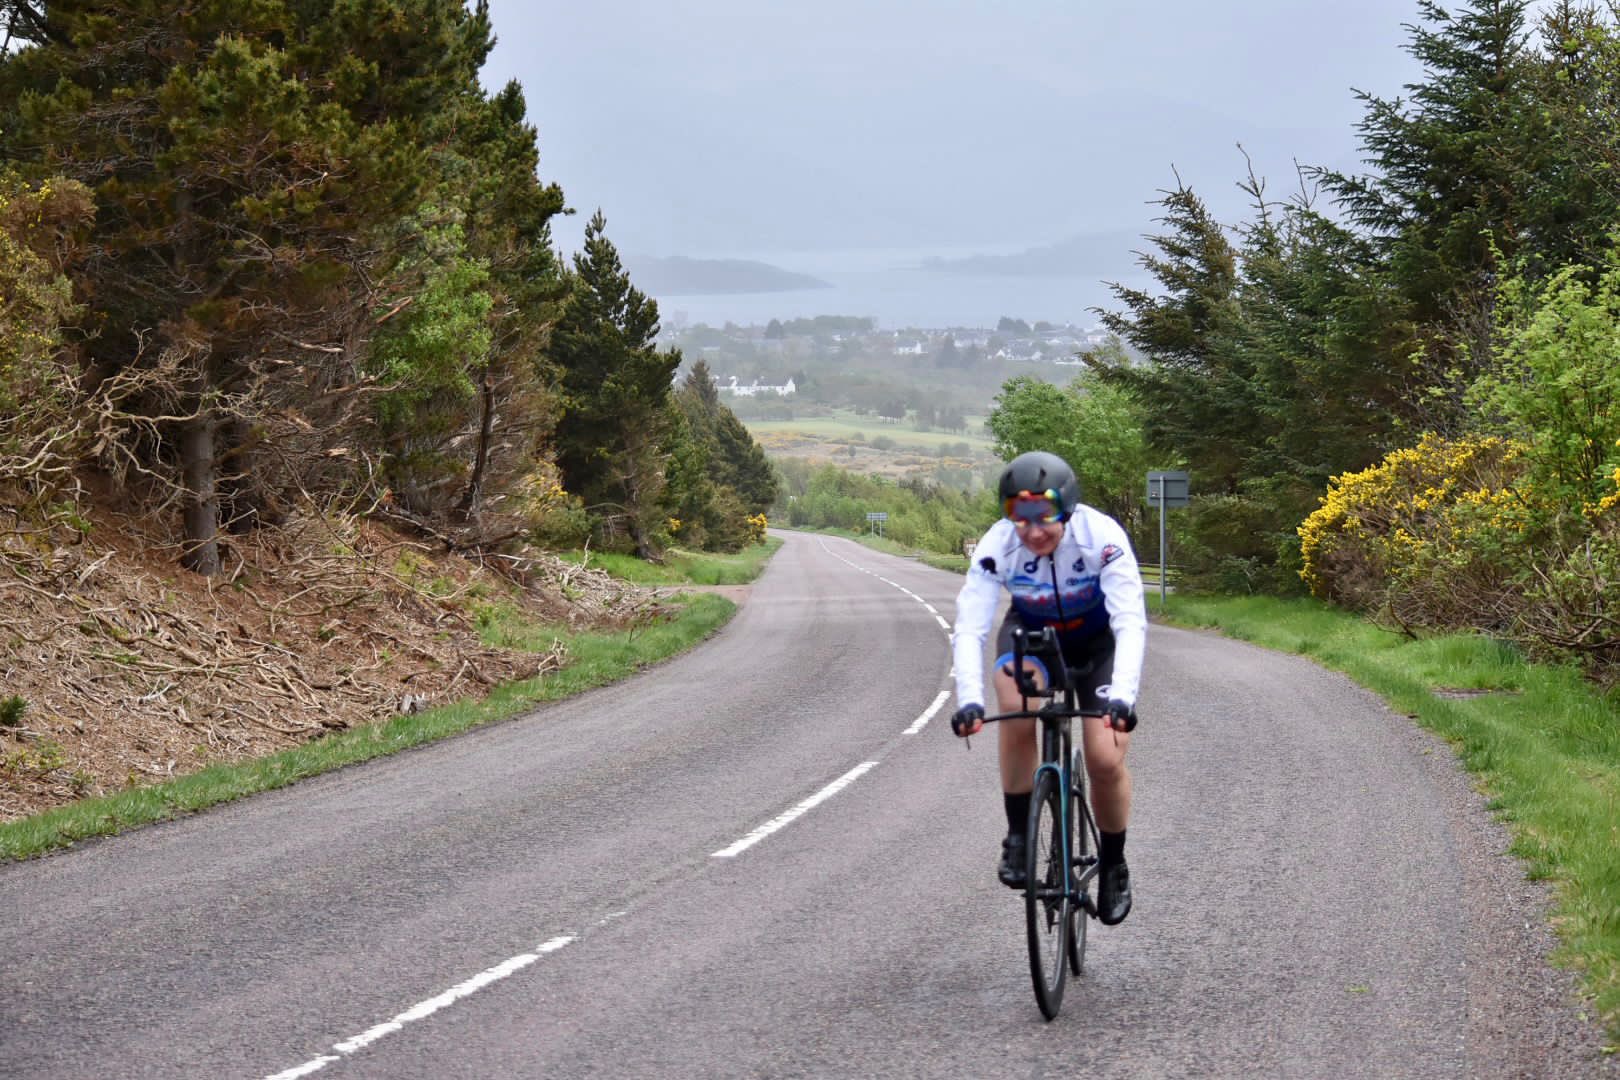 Christina set a women's record in July 2021 after cycling from Land's End to John O'Groats.